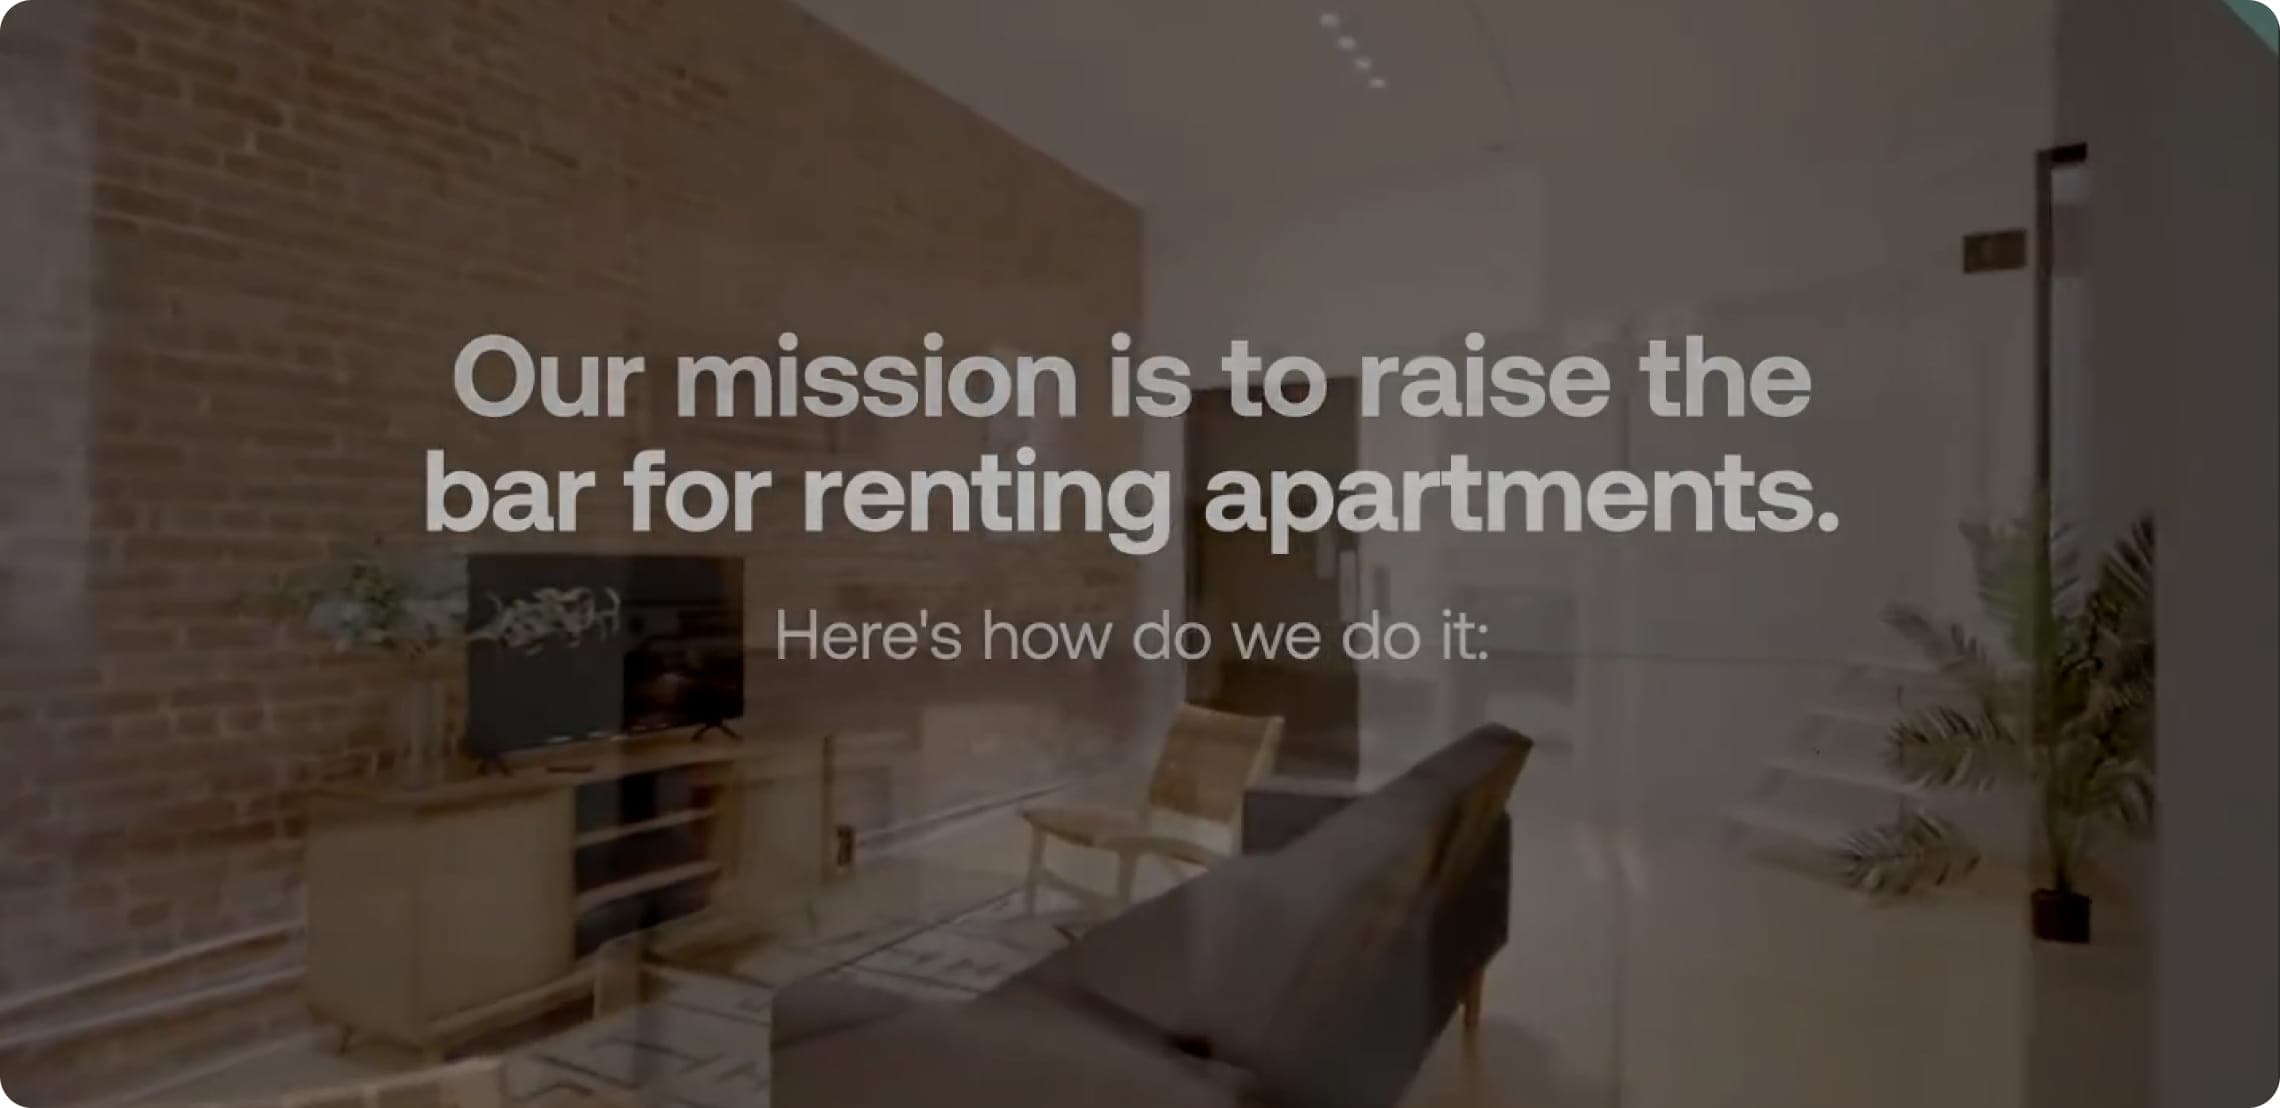 Our mission is to raise the bar for renting apartments